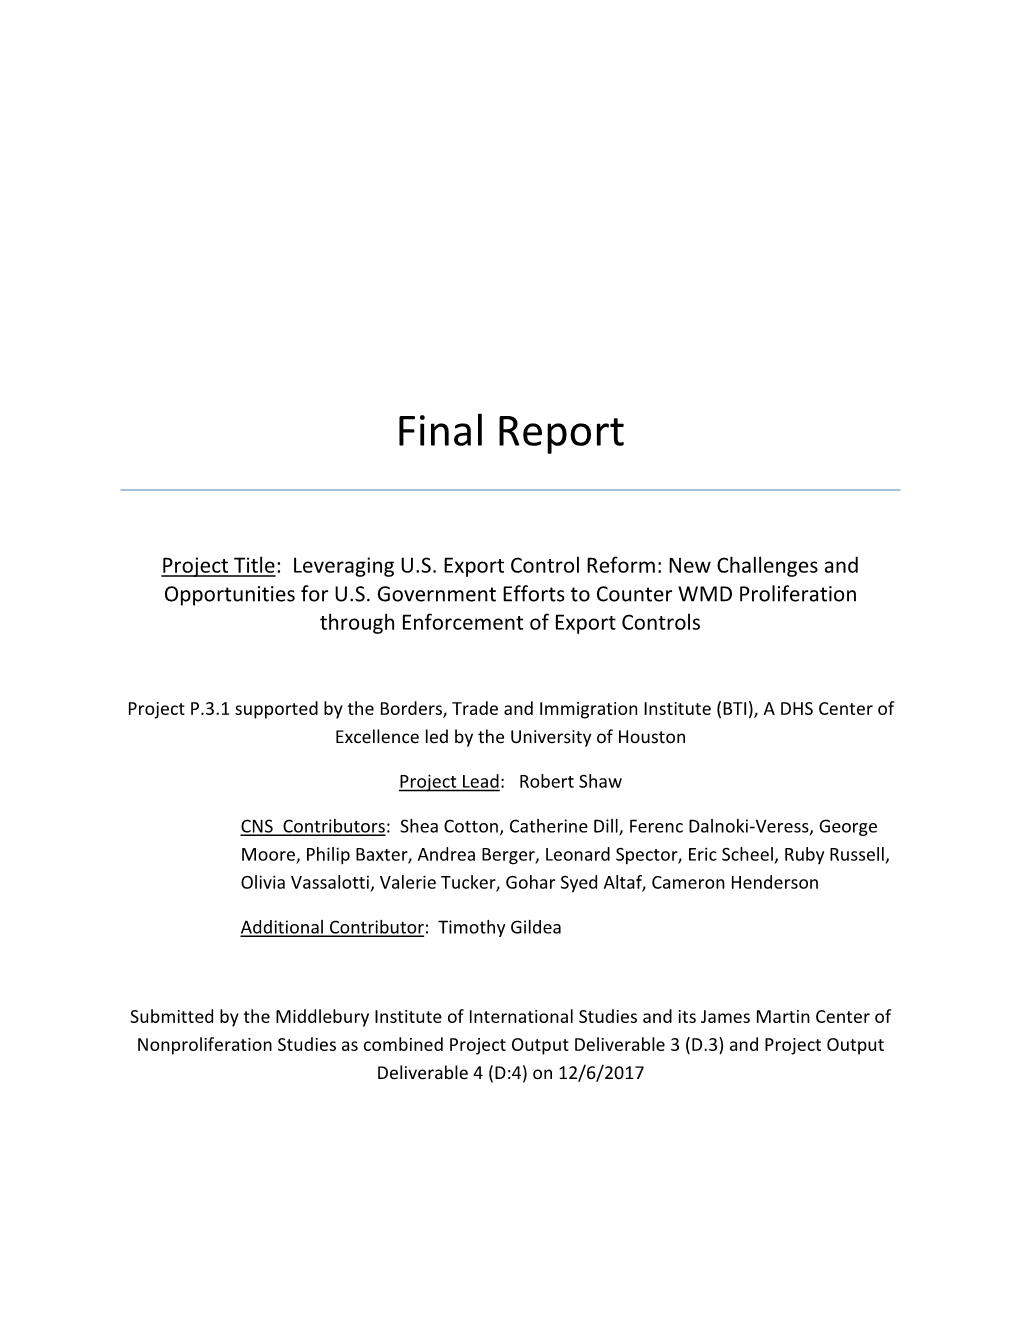 Final Report and Recommendations